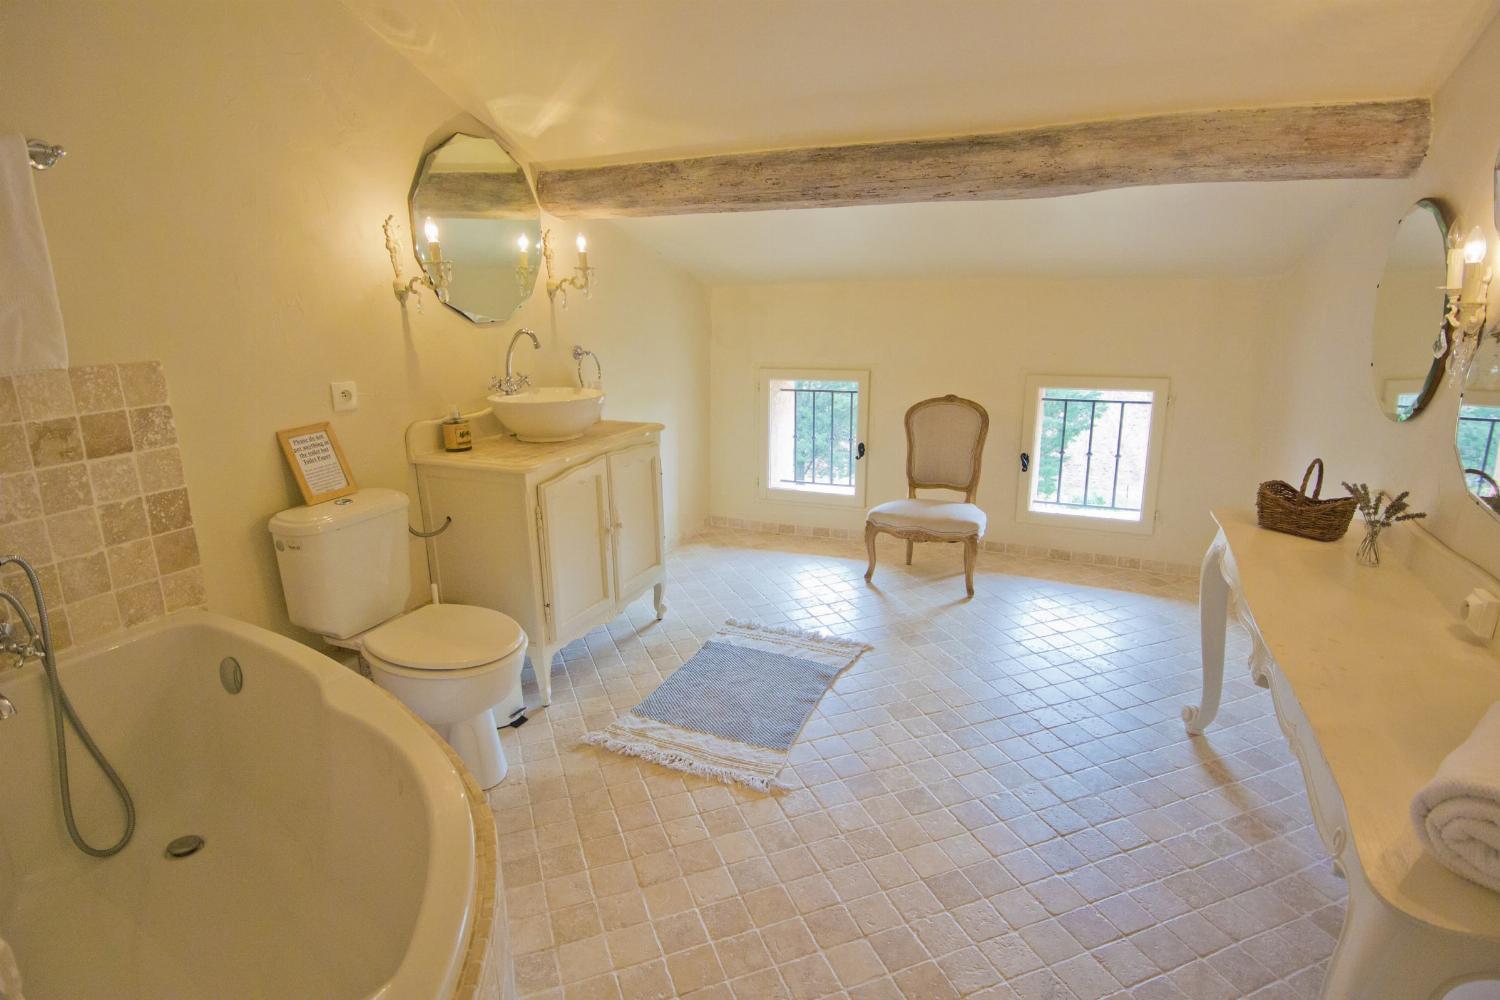 Bathroom | Rental home in Provence